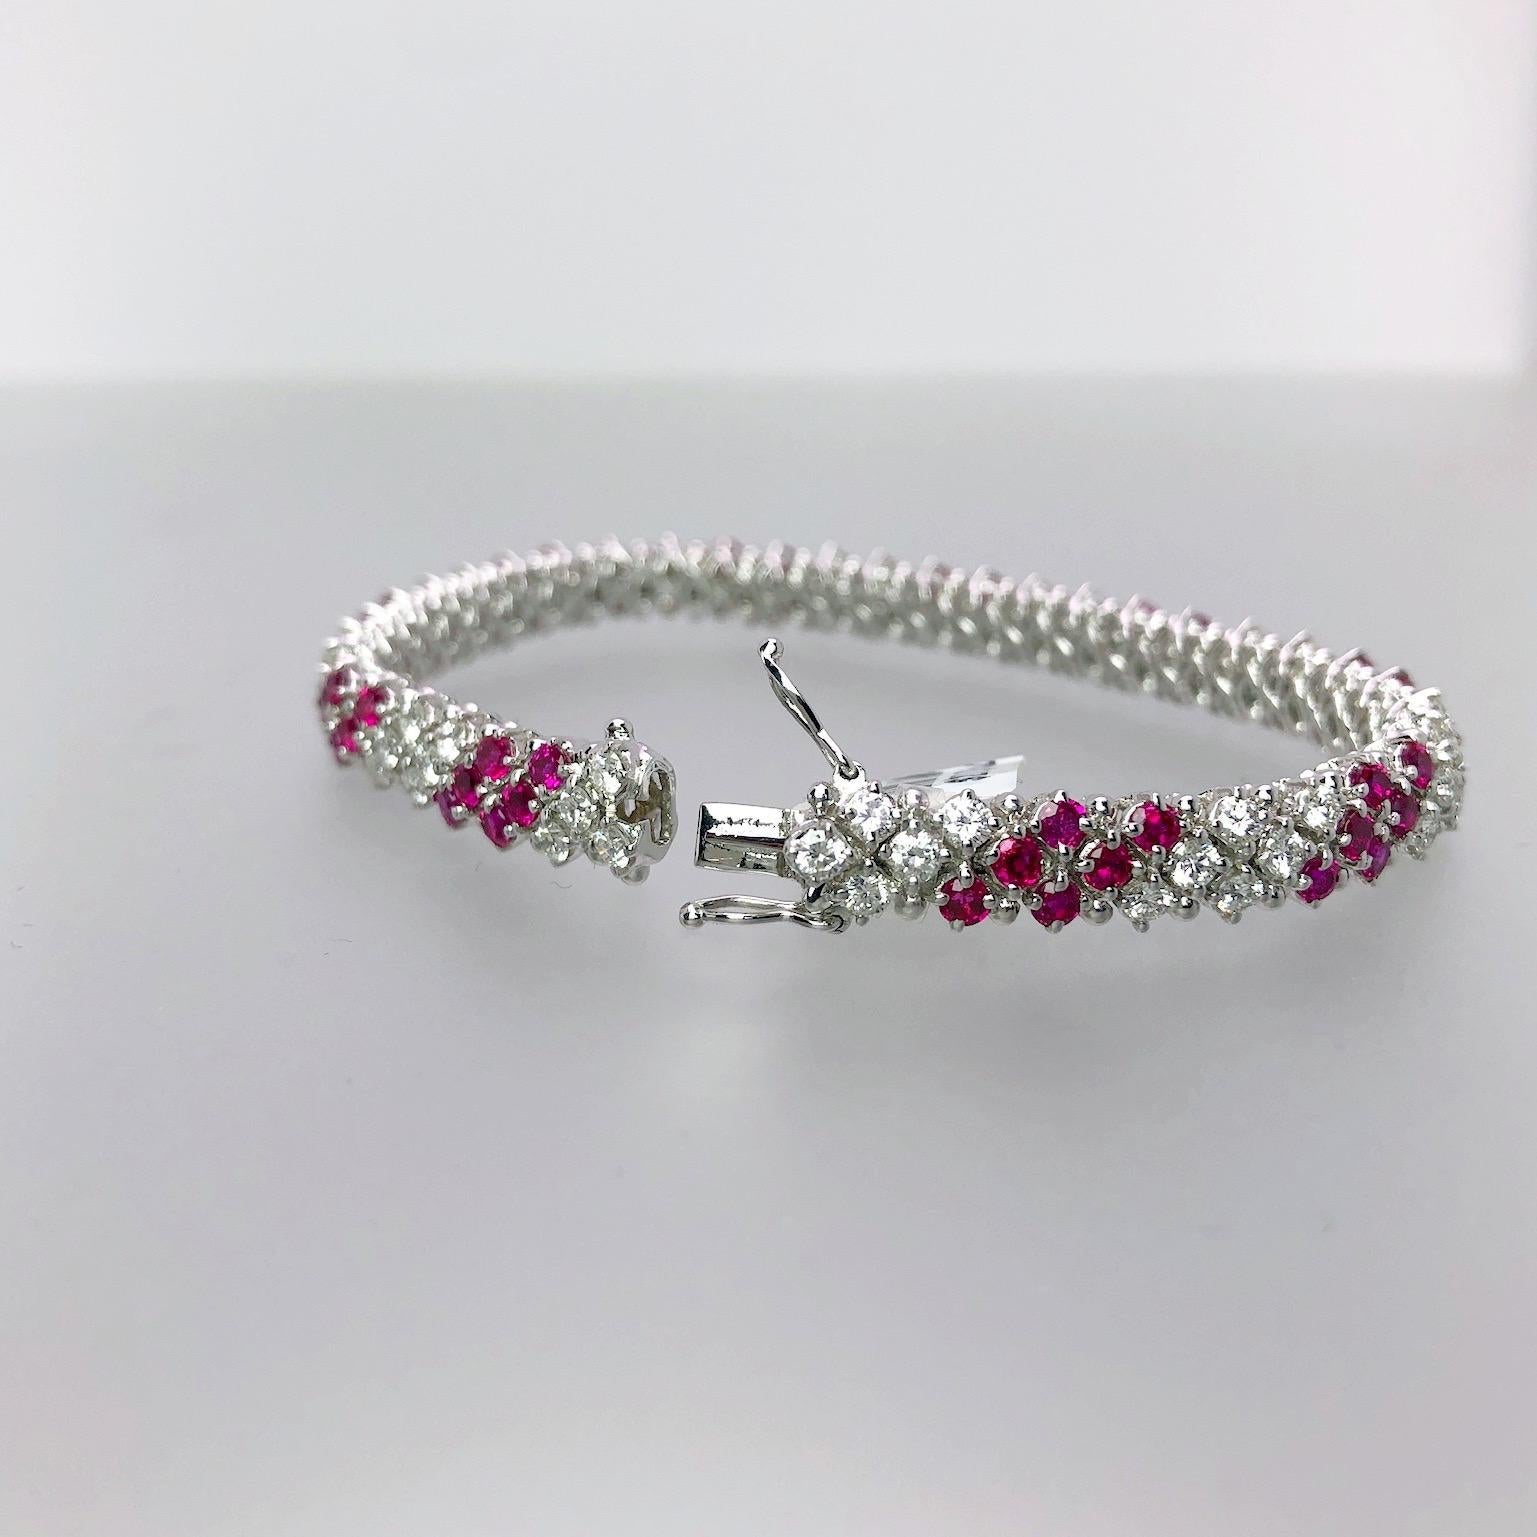 Crafted by one of the most esteemed Jewelers in Italy and Internationally, Crivelli Gioielli, this bracelet exemplifies fine quality craftsmanship, preciousness of gems, and creativity. This Bracelet is composed of alternating sections of Brilliant